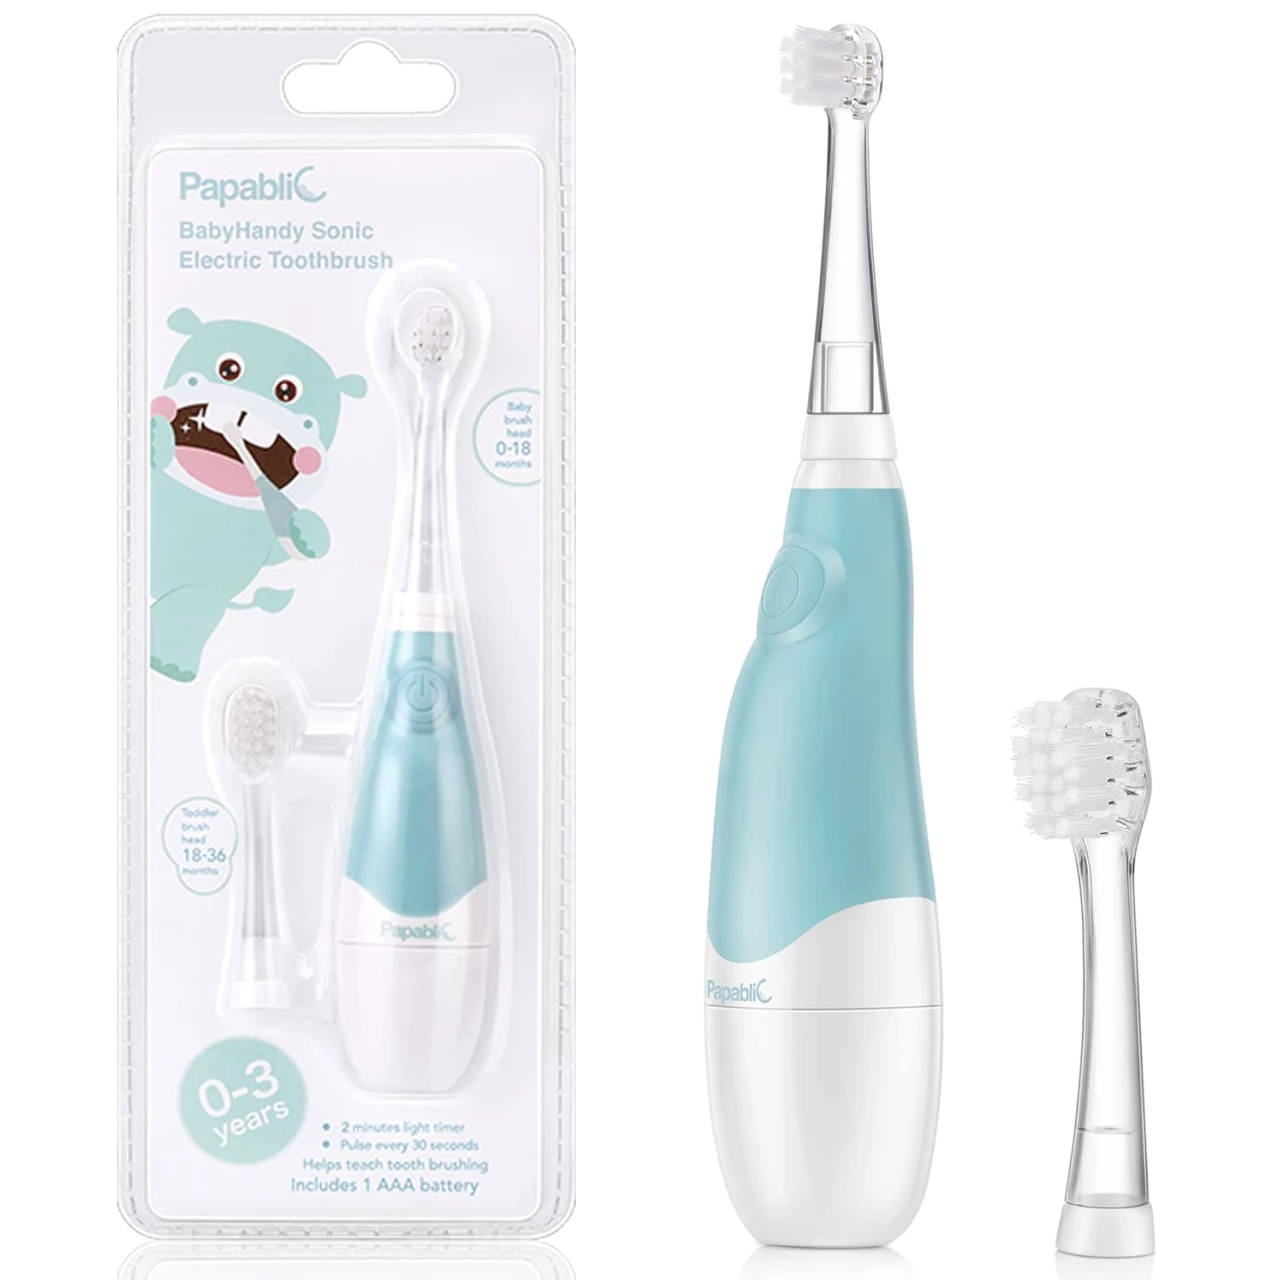 Papablic BabyHandy 2-Stage Baby Sonic Electric Toothbrush